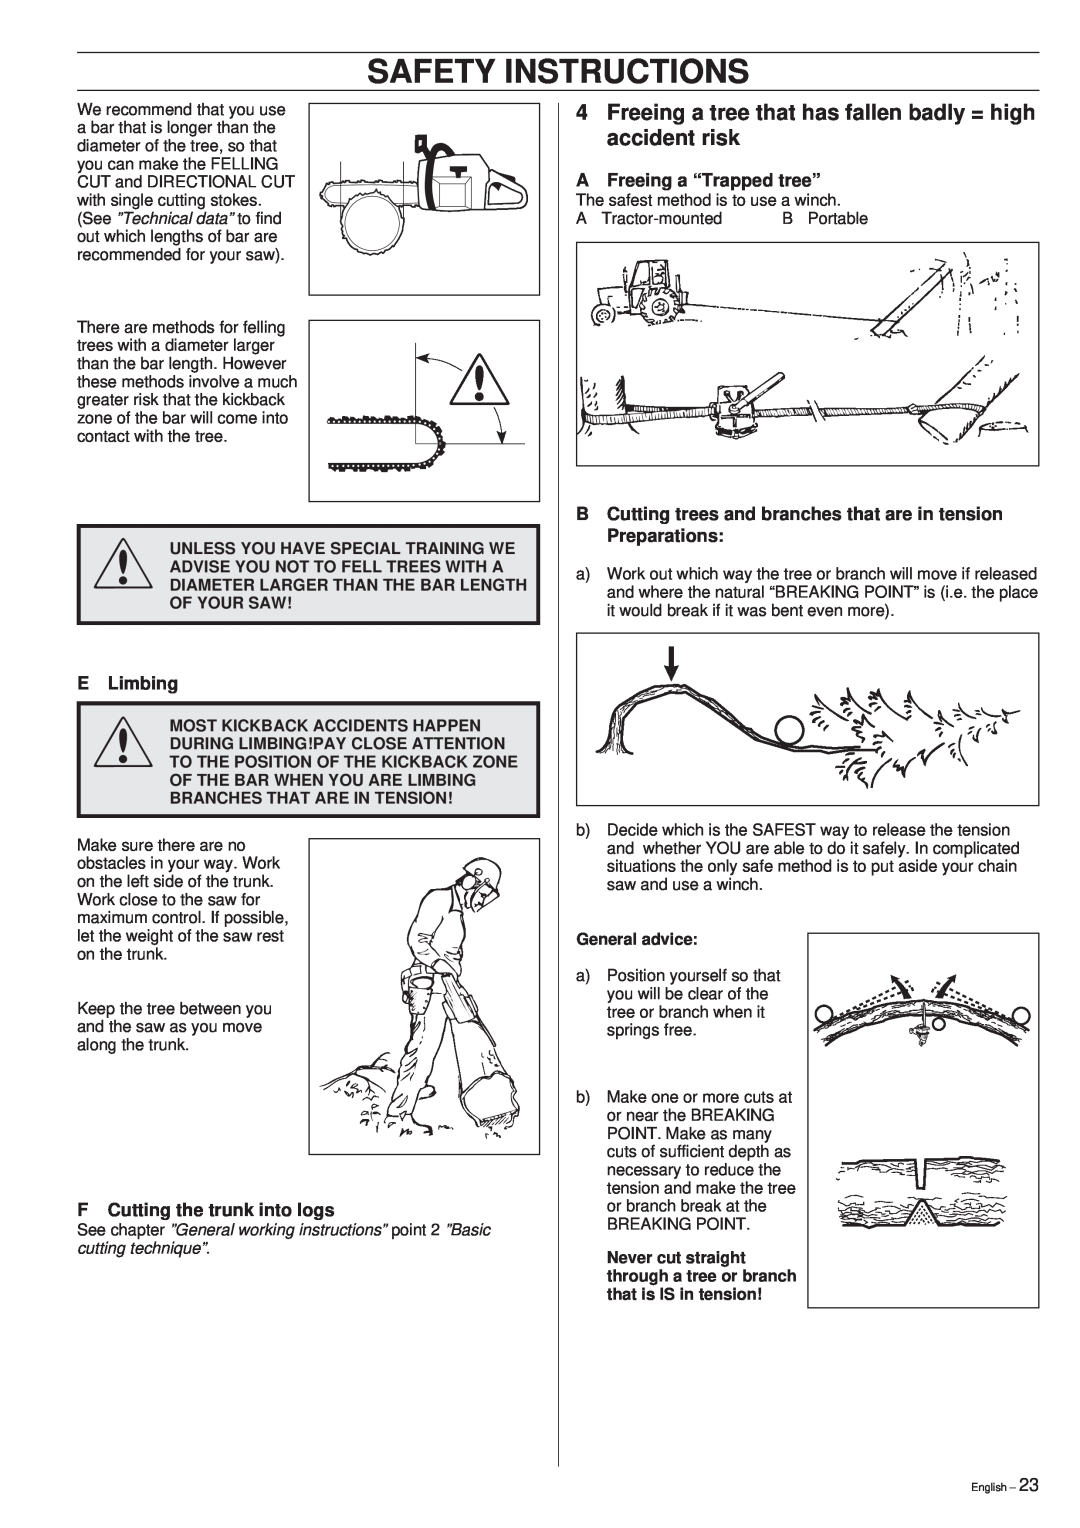 Husqvarna 394XP manual Safety Instructions, ELimbing, F Cutting the trunk into logs, AFreeing a “Trapped tree” 